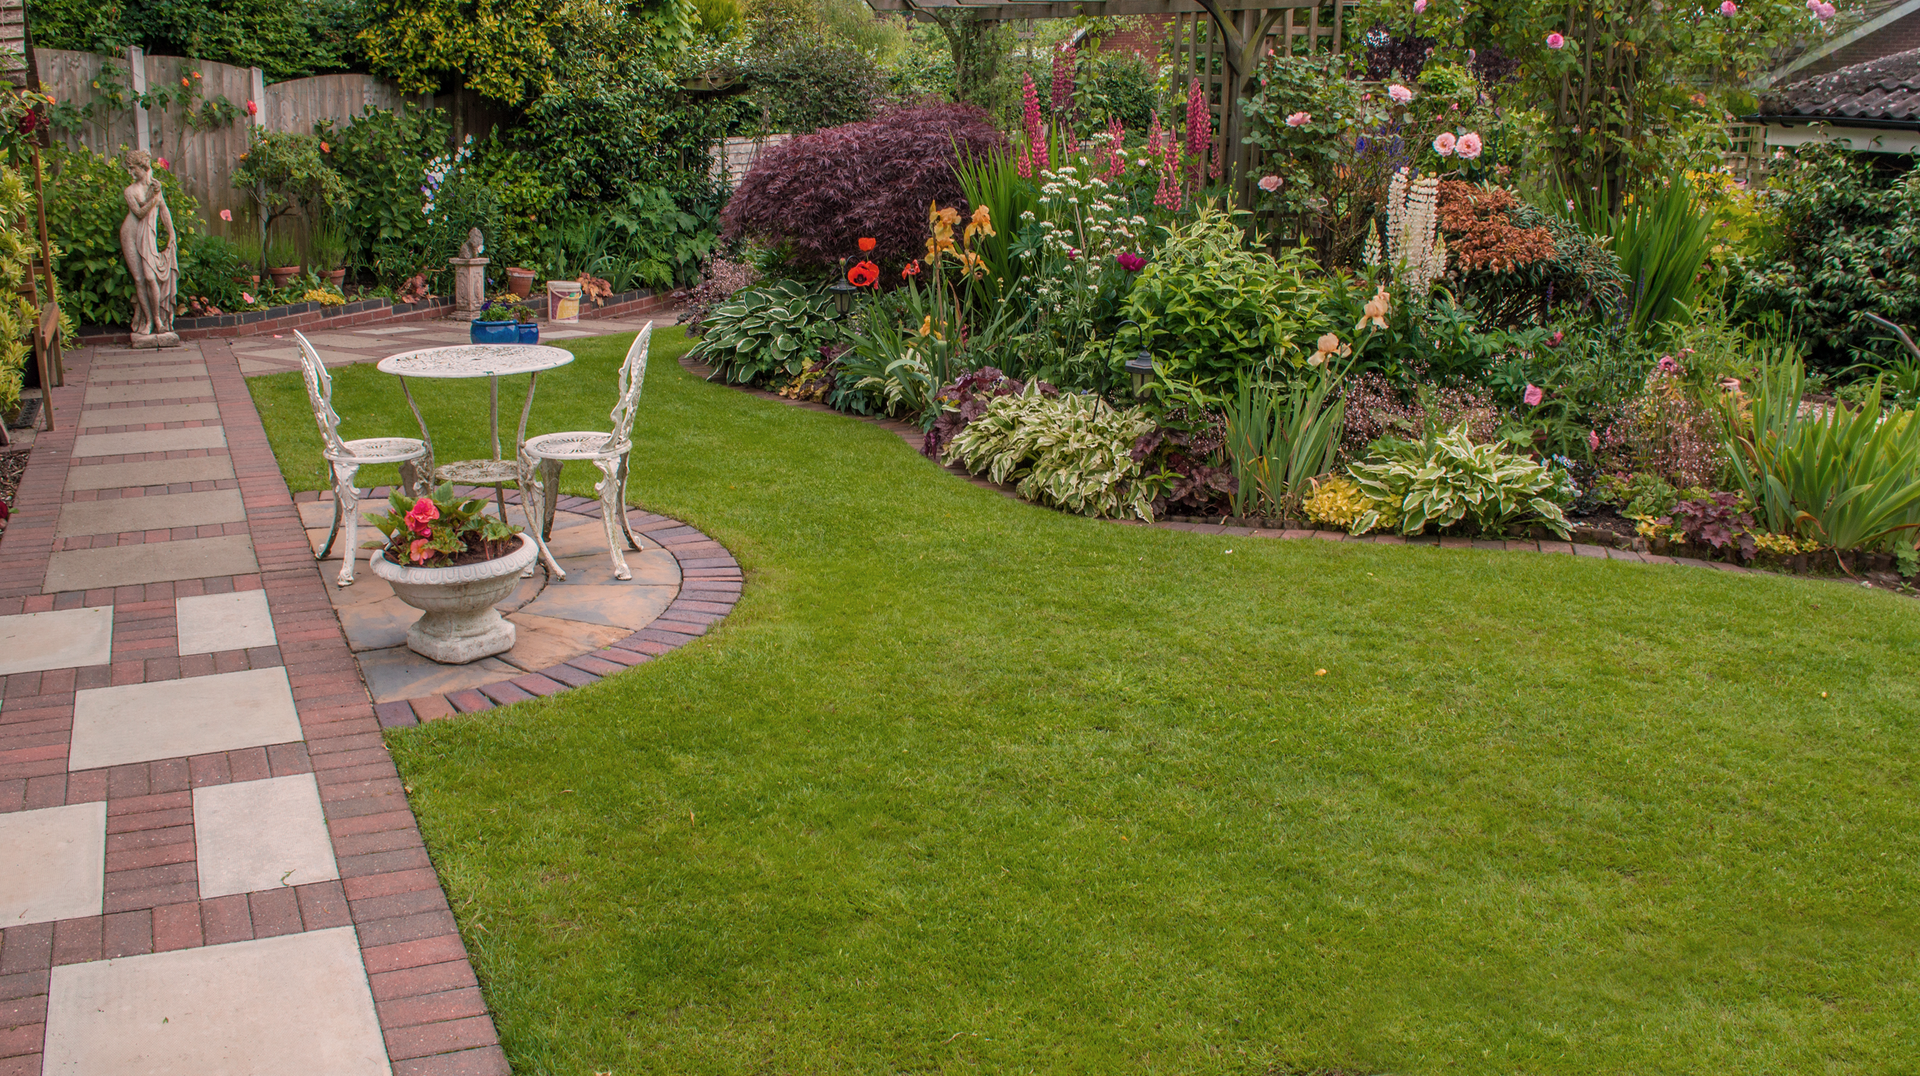 mature plants in well maintained and well stocked garden & border